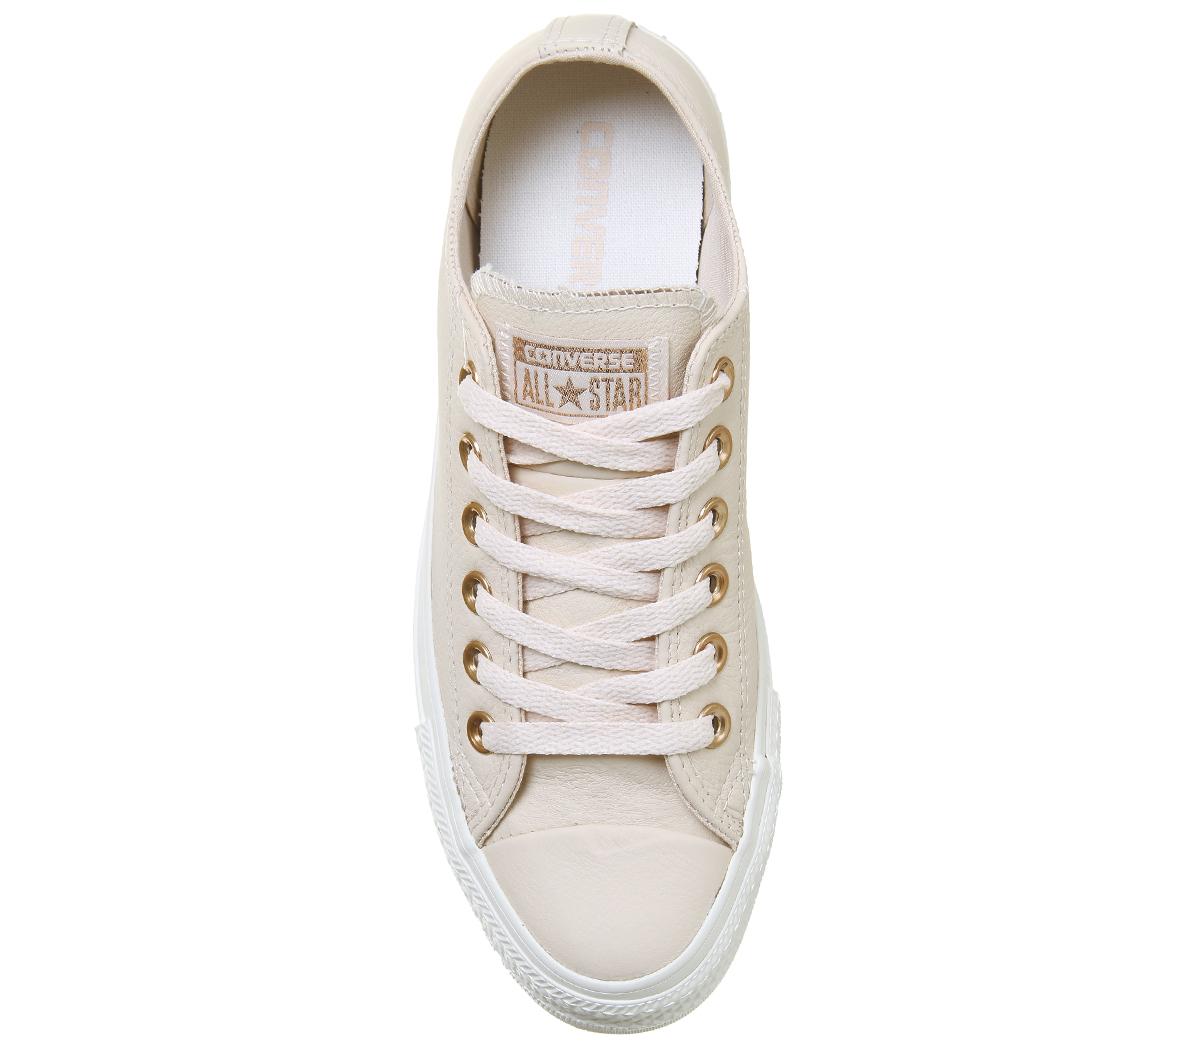 Converse All Star Low Leather Egret Pastel Rose Tan Blush Gold - Hers ...